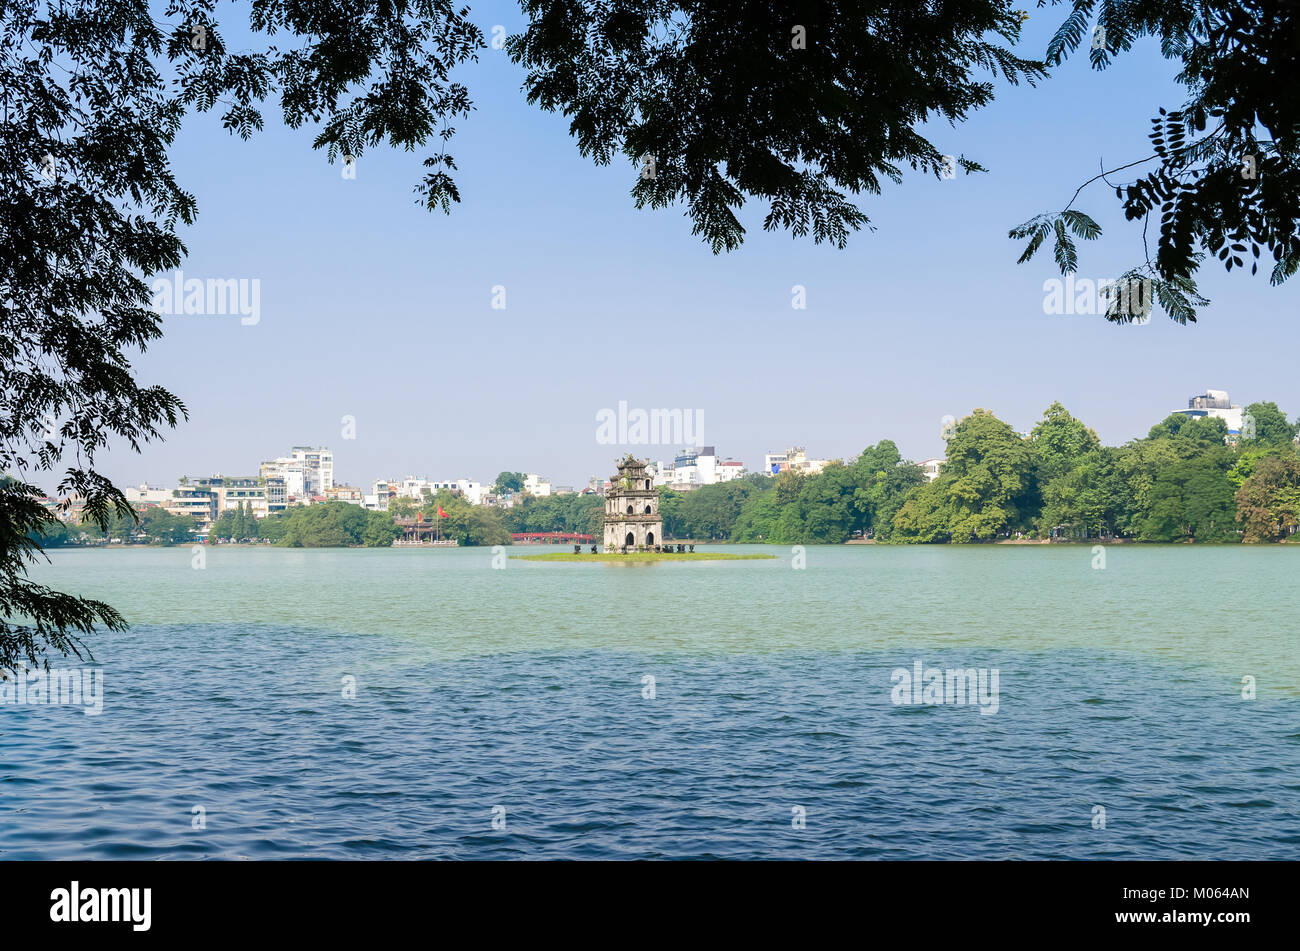 Turtle Tower or Tortoise tower which is located in the middle of the Hoan Kiem Lake. Hoan Kiem Lake meaning 'Lake of the Returned Sword'. Stock Photo